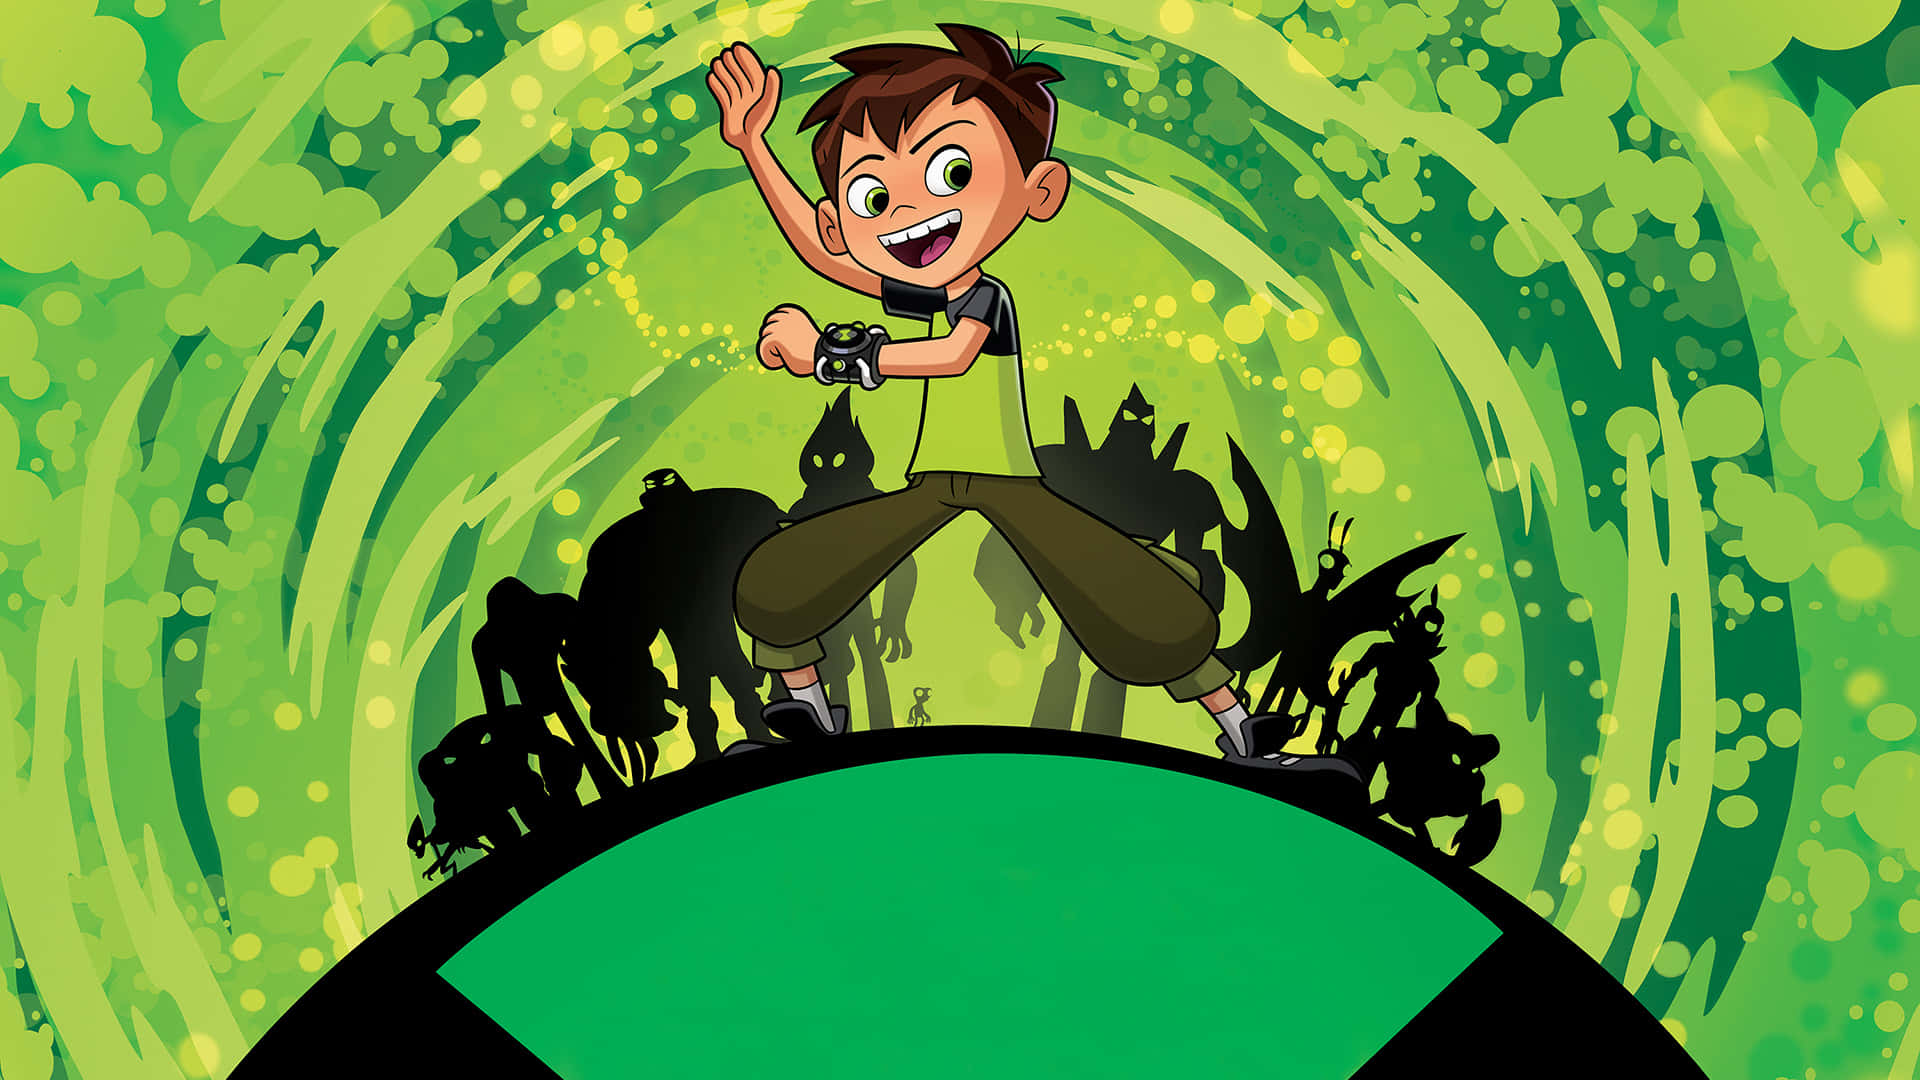 Ben 10 - He has the power to save the world